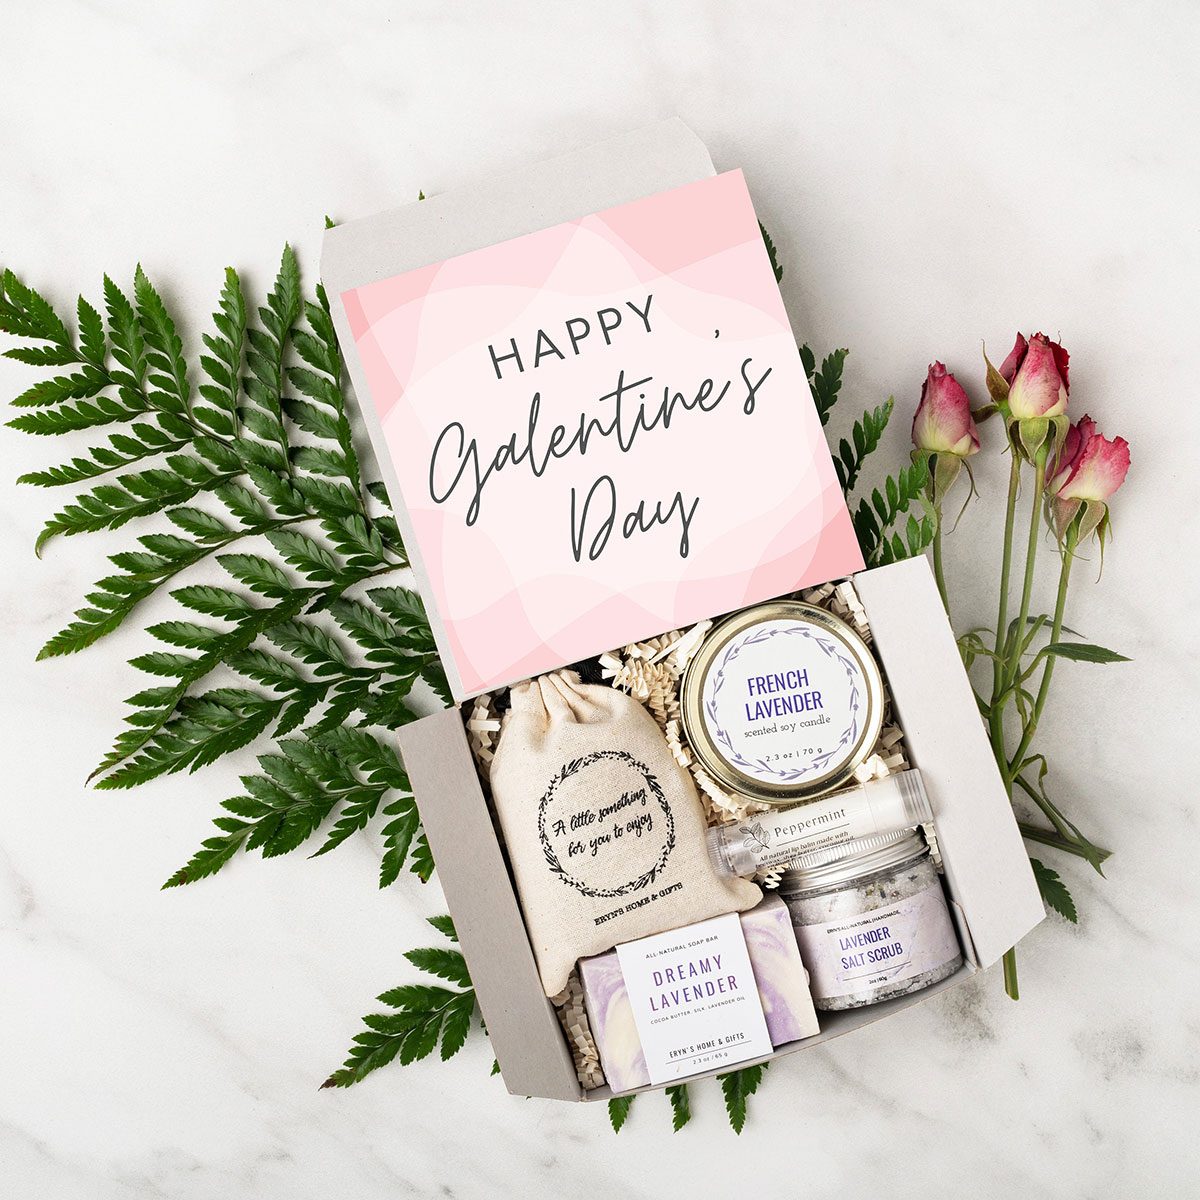 TheKristenDiary: GALENTINE'S DAY GIFT IDEAS!